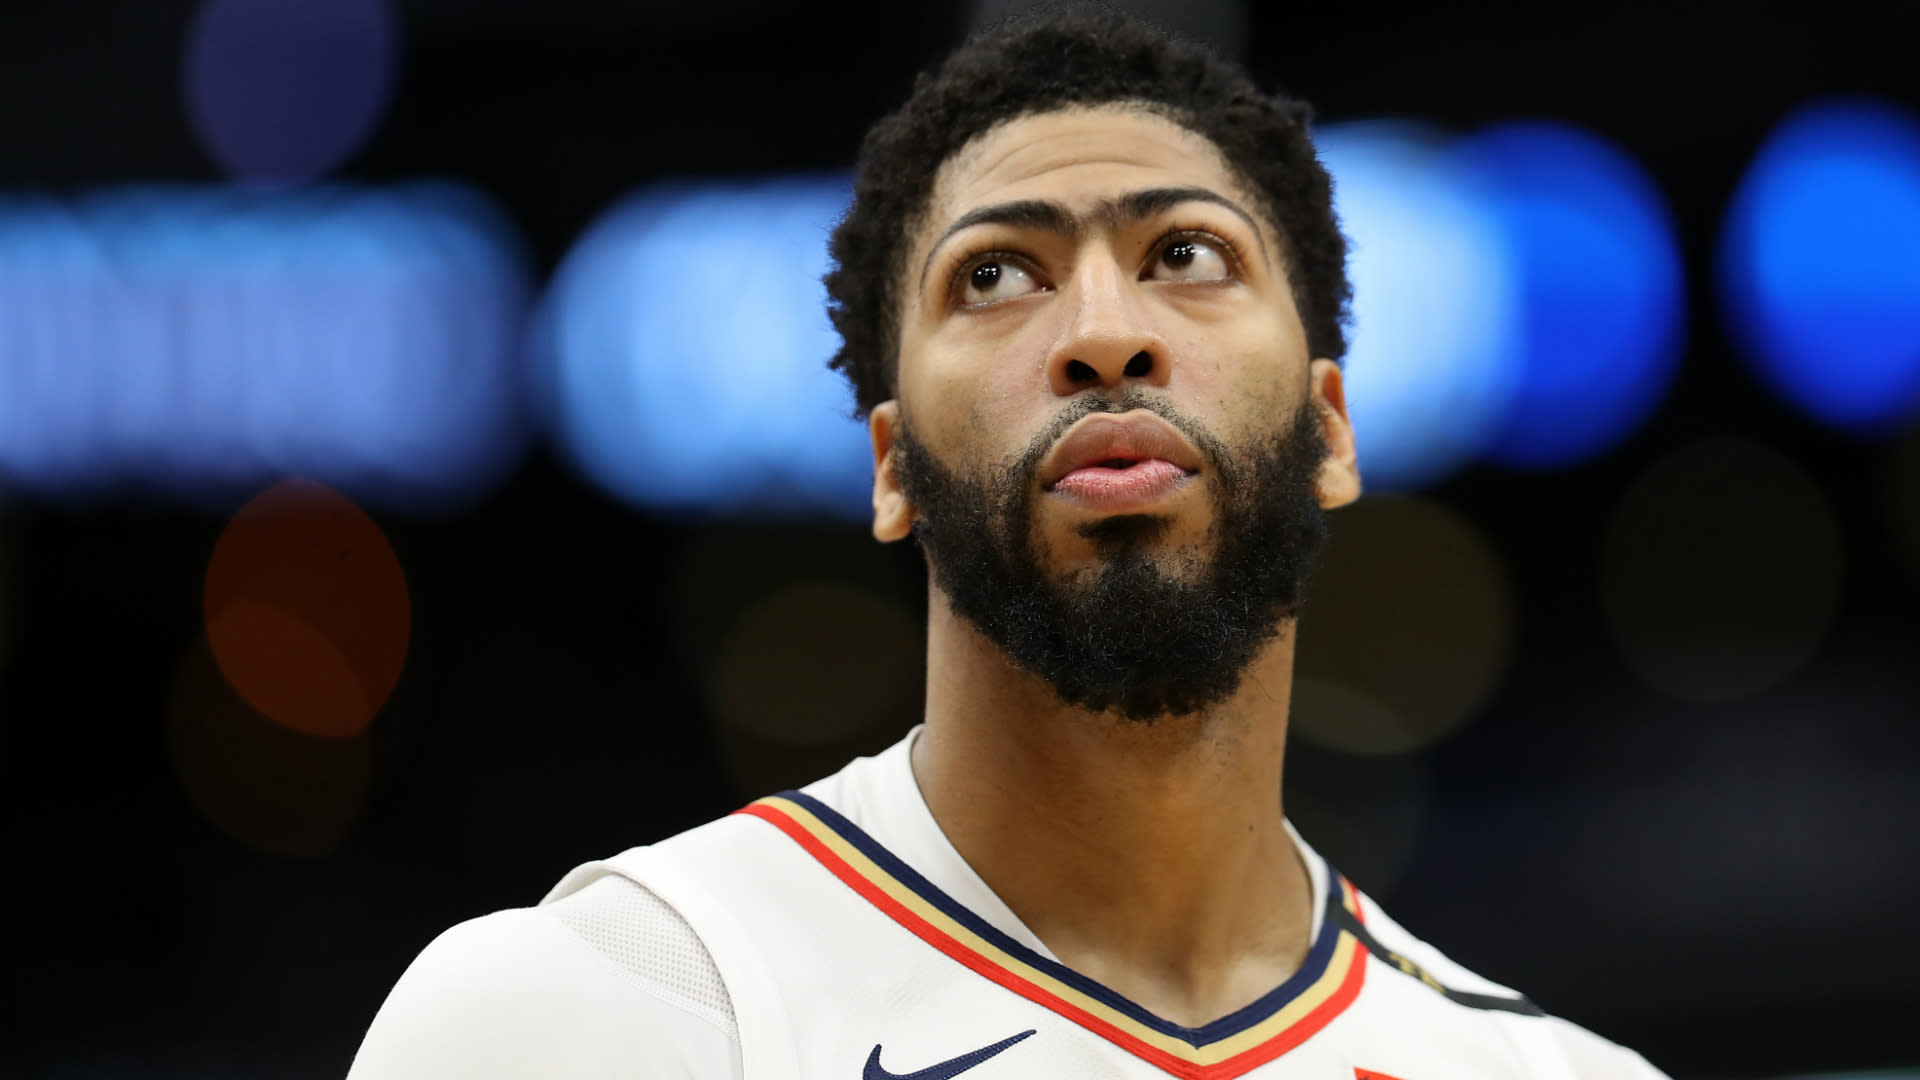 NBA trade rumors: Pelicans engaged with 'several teams' about Anthony Davis deal1920 x 1080